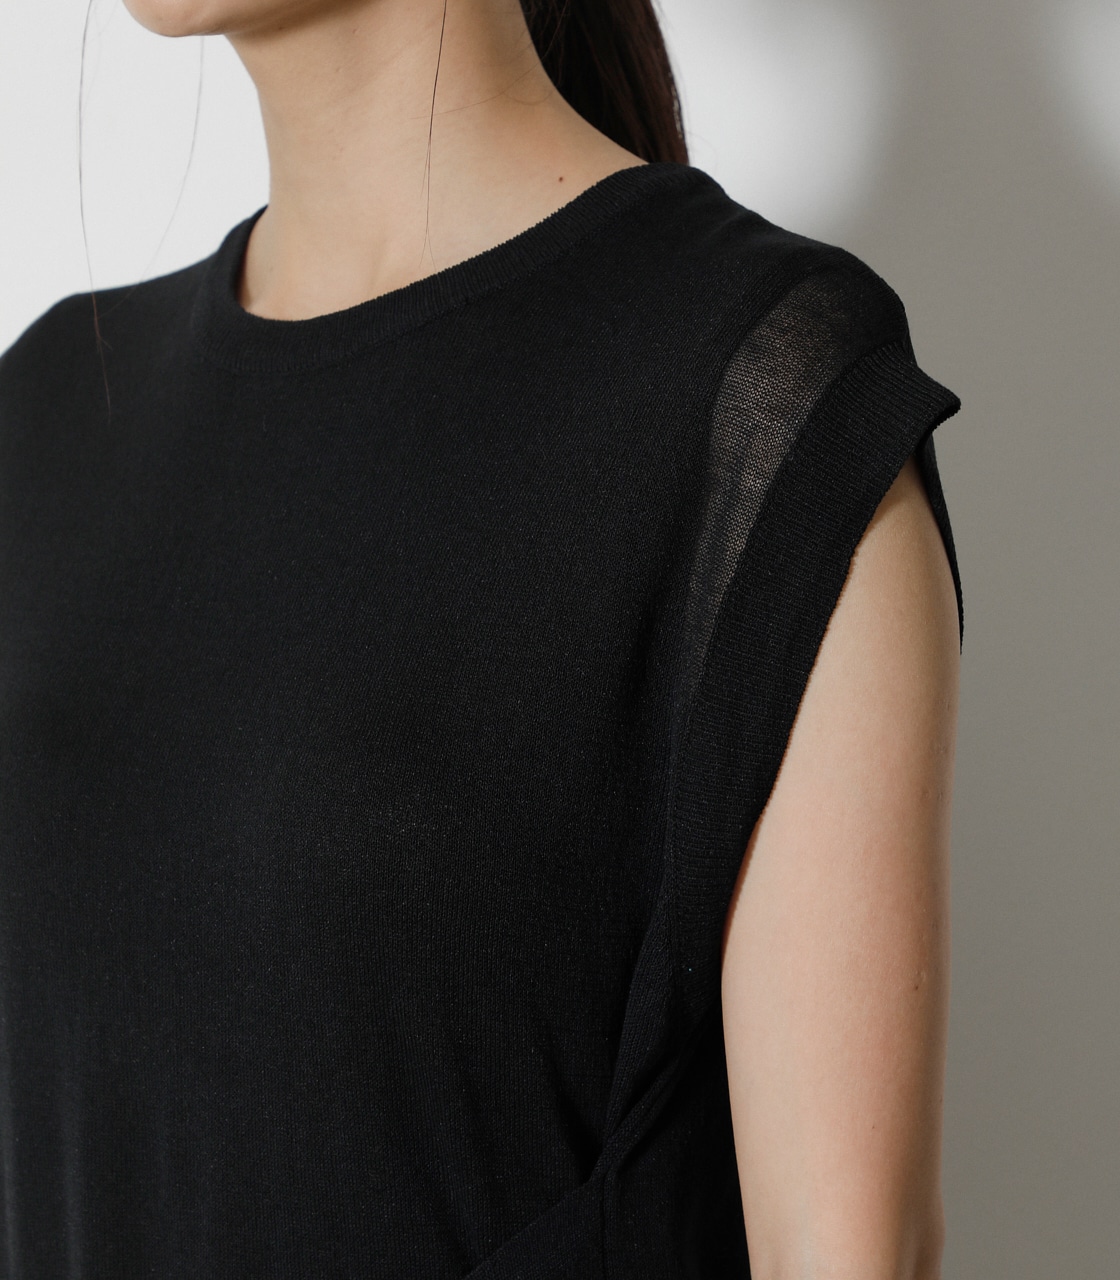 SHEER KNIT LONG TOPS/シアーニットロングトップス 詳細画像 BLK 8